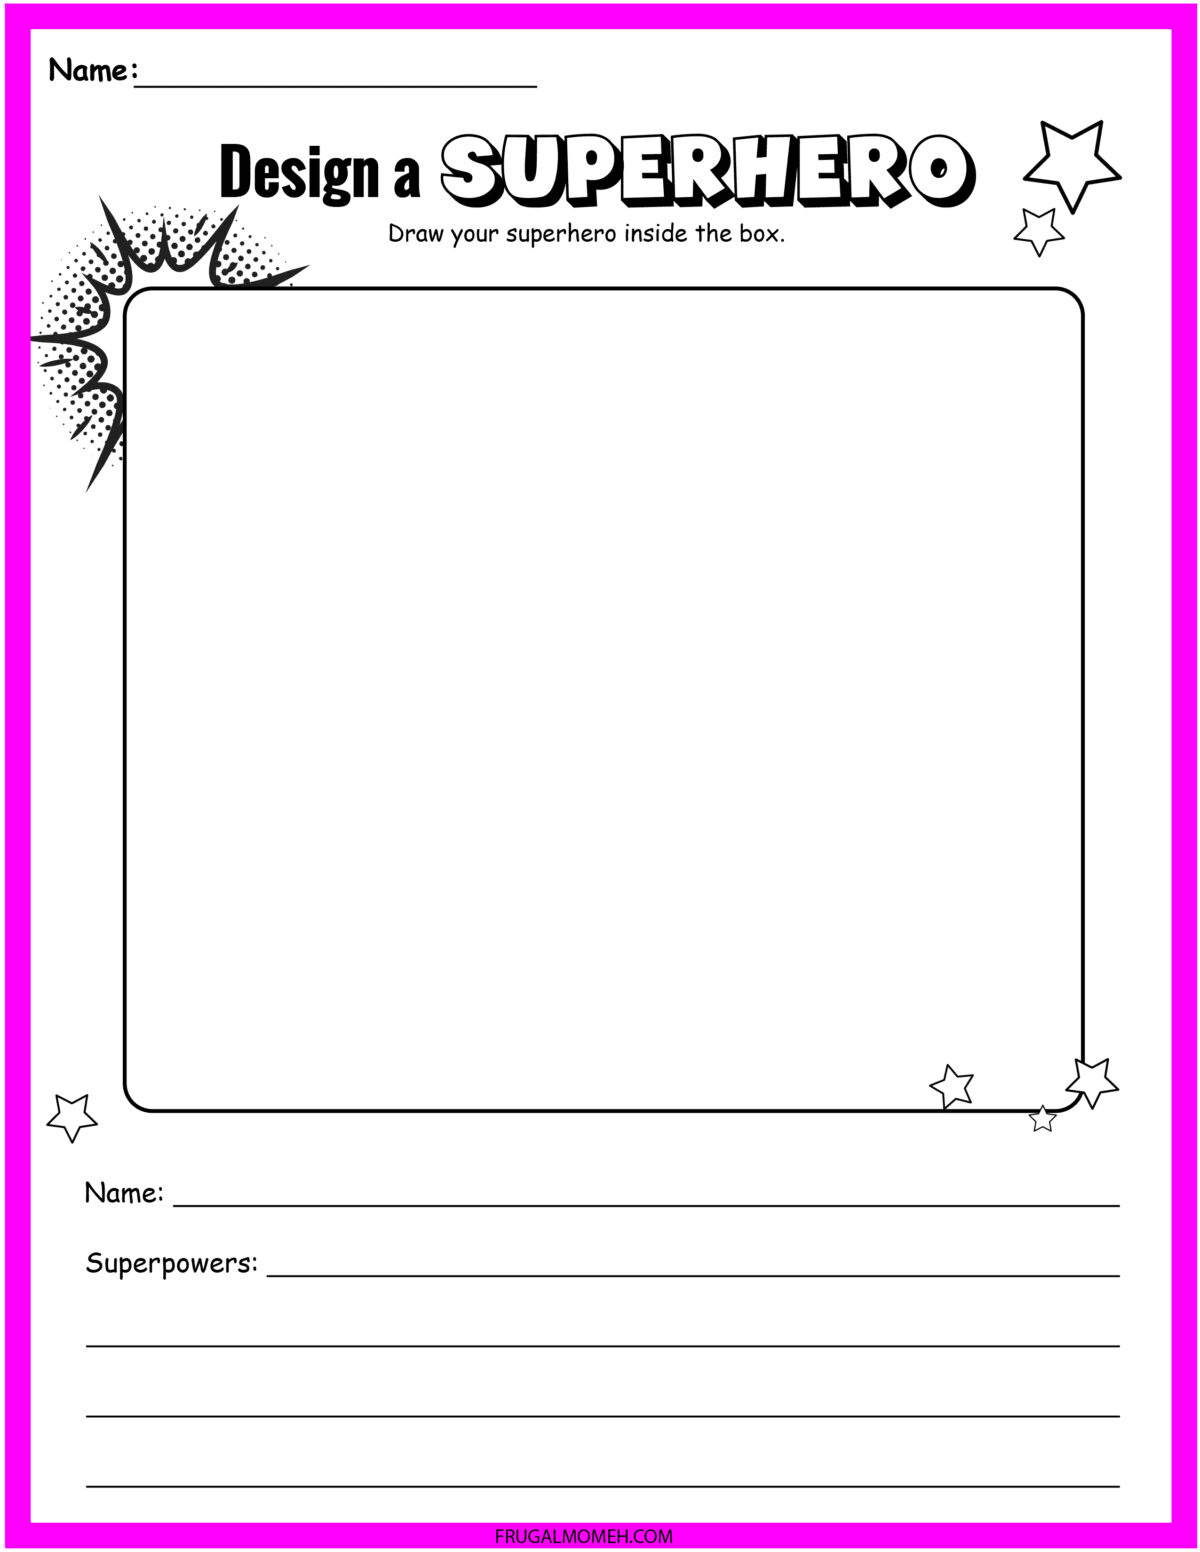 The design your own superhero worksheet has space for kids to draw their superhero, come up with a superhero name, and brainstorm their own special superpowers!